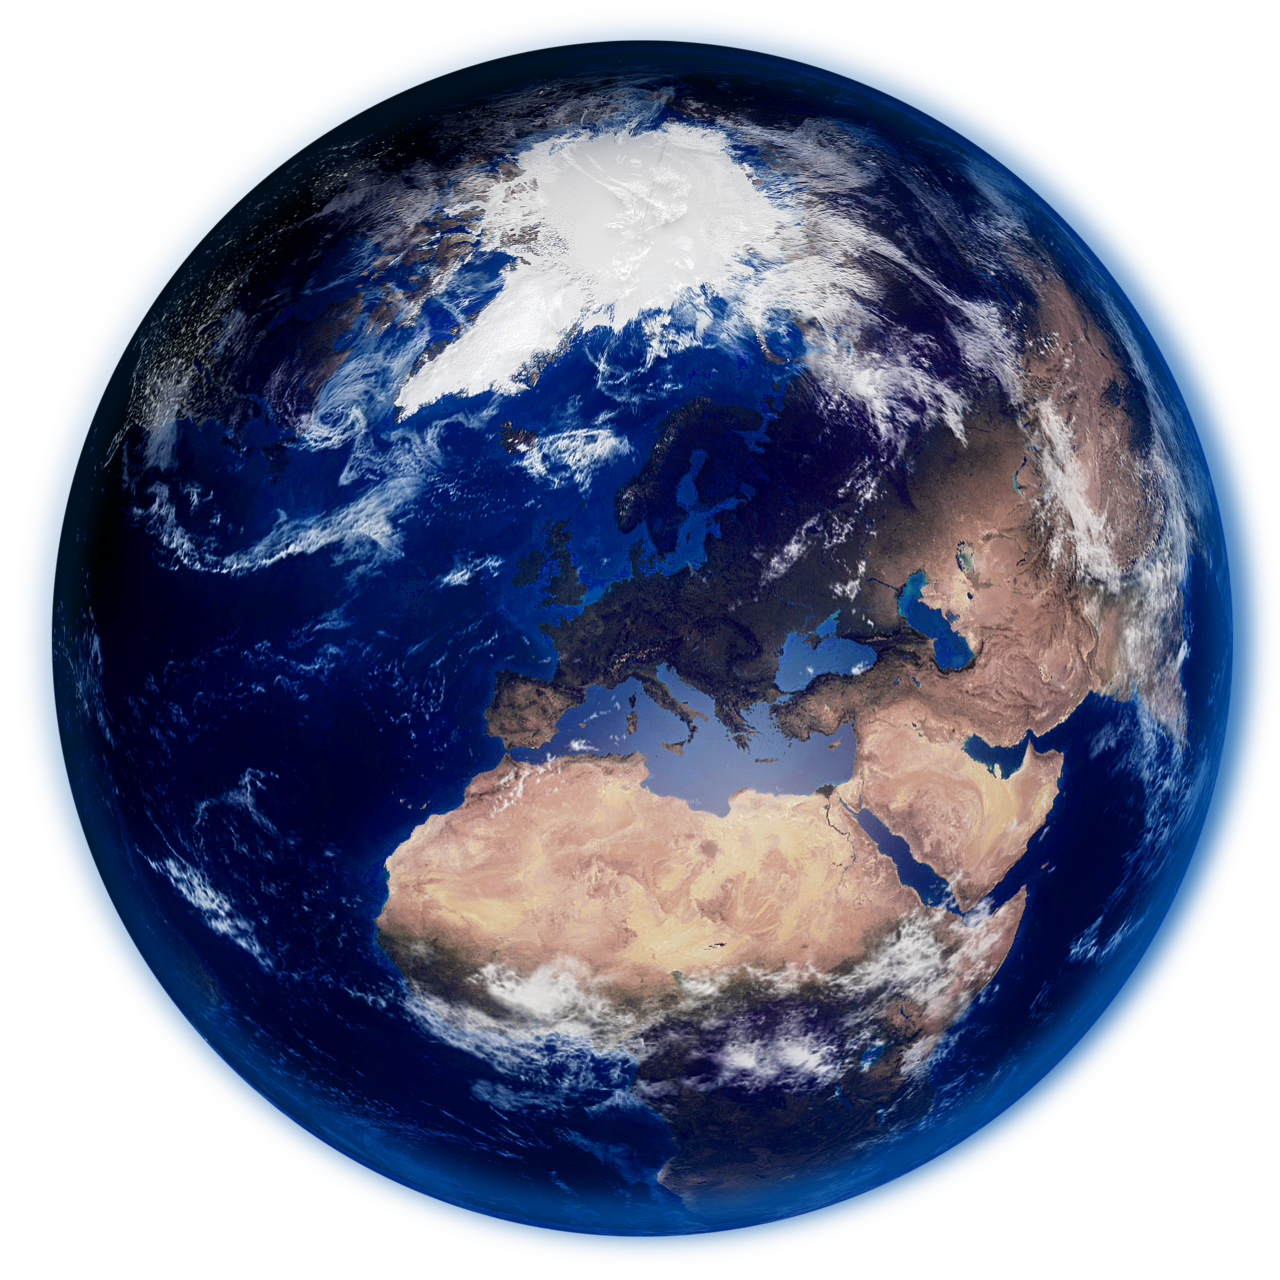 earth transparent background